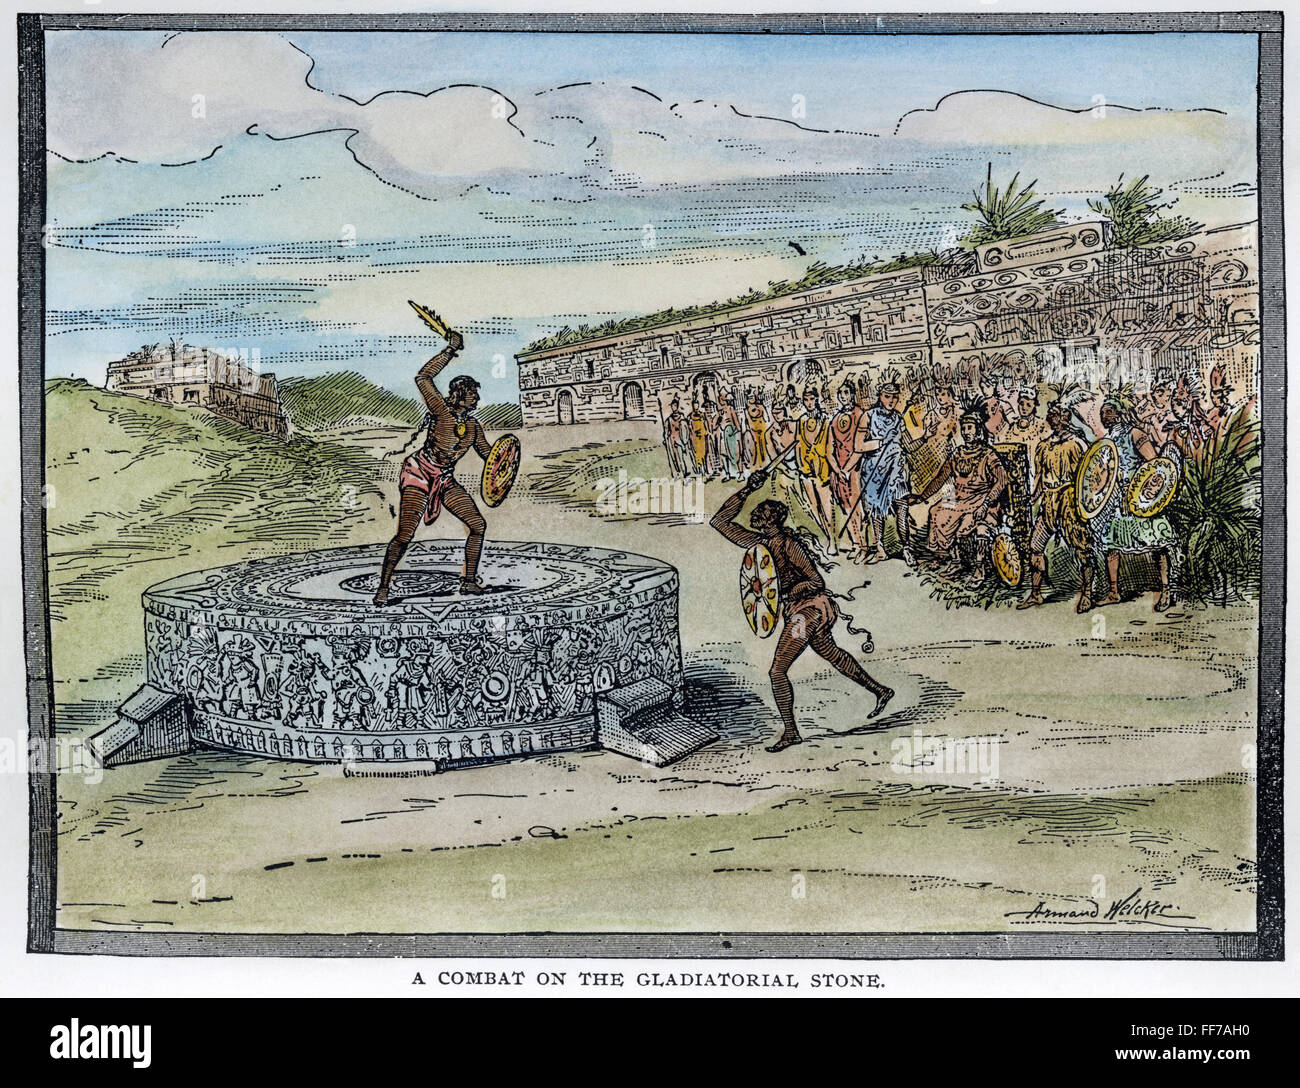 MEXICO: AZTEC WARRIORS. /nAztec warriors engaged in ritualized combat on a calendar stone before their king in Tenochtitlan. Wood engraving, 19th century. Stock Photo